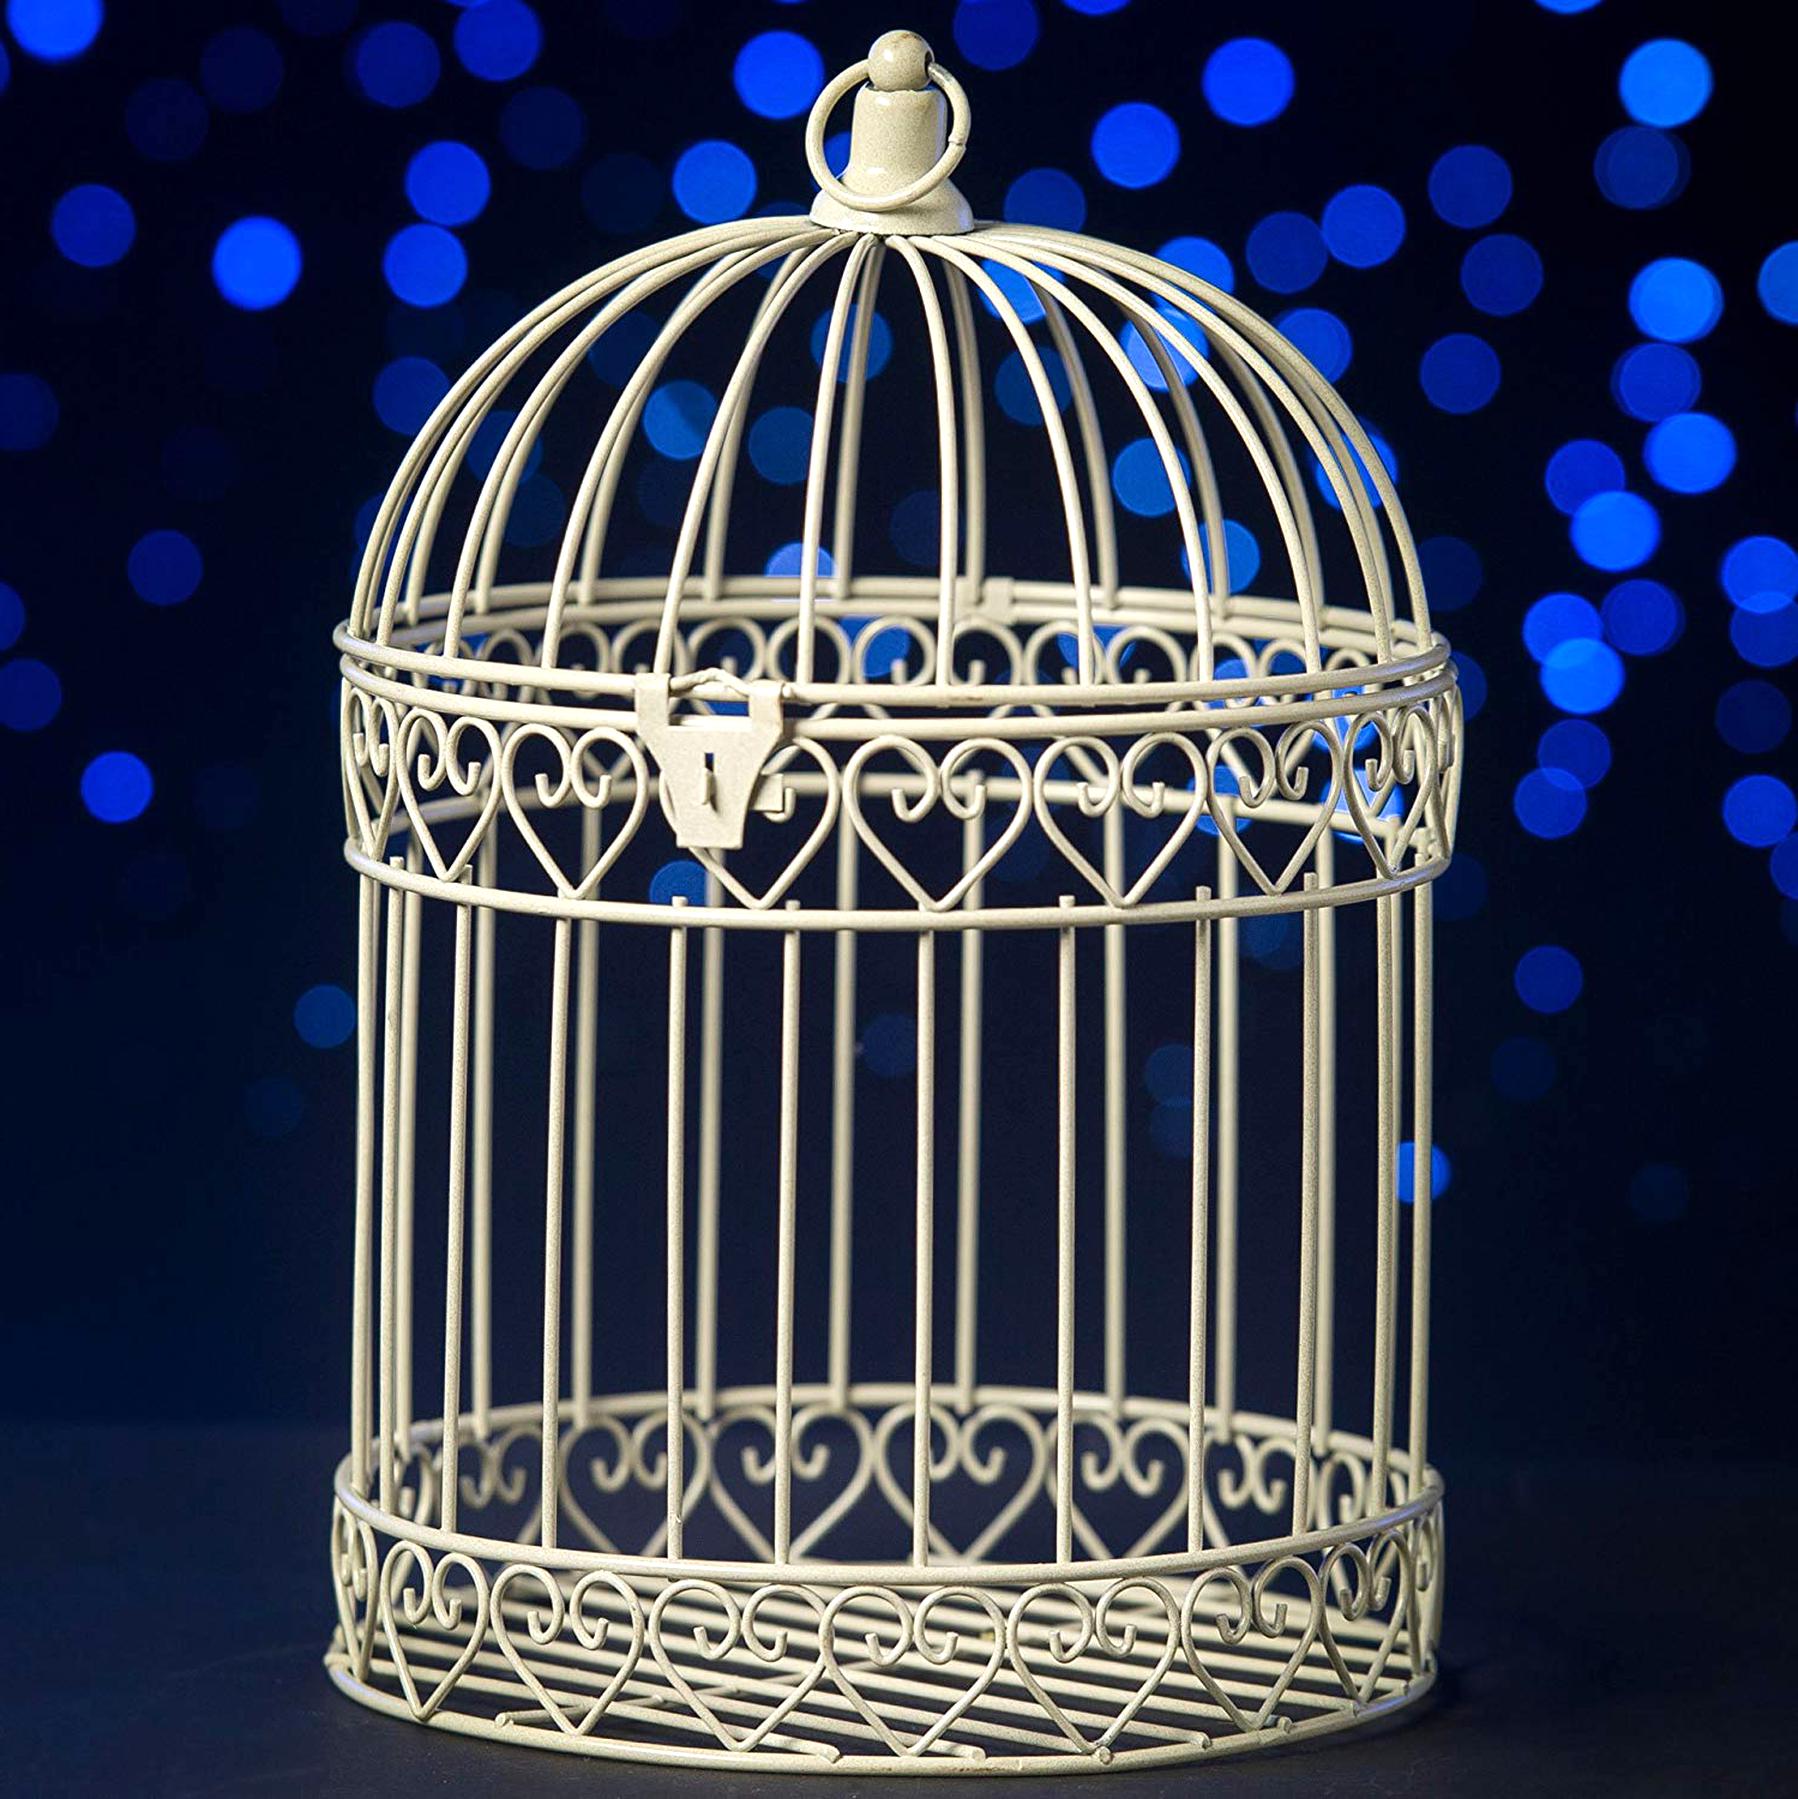 44+ Bird Cages For Sale Background